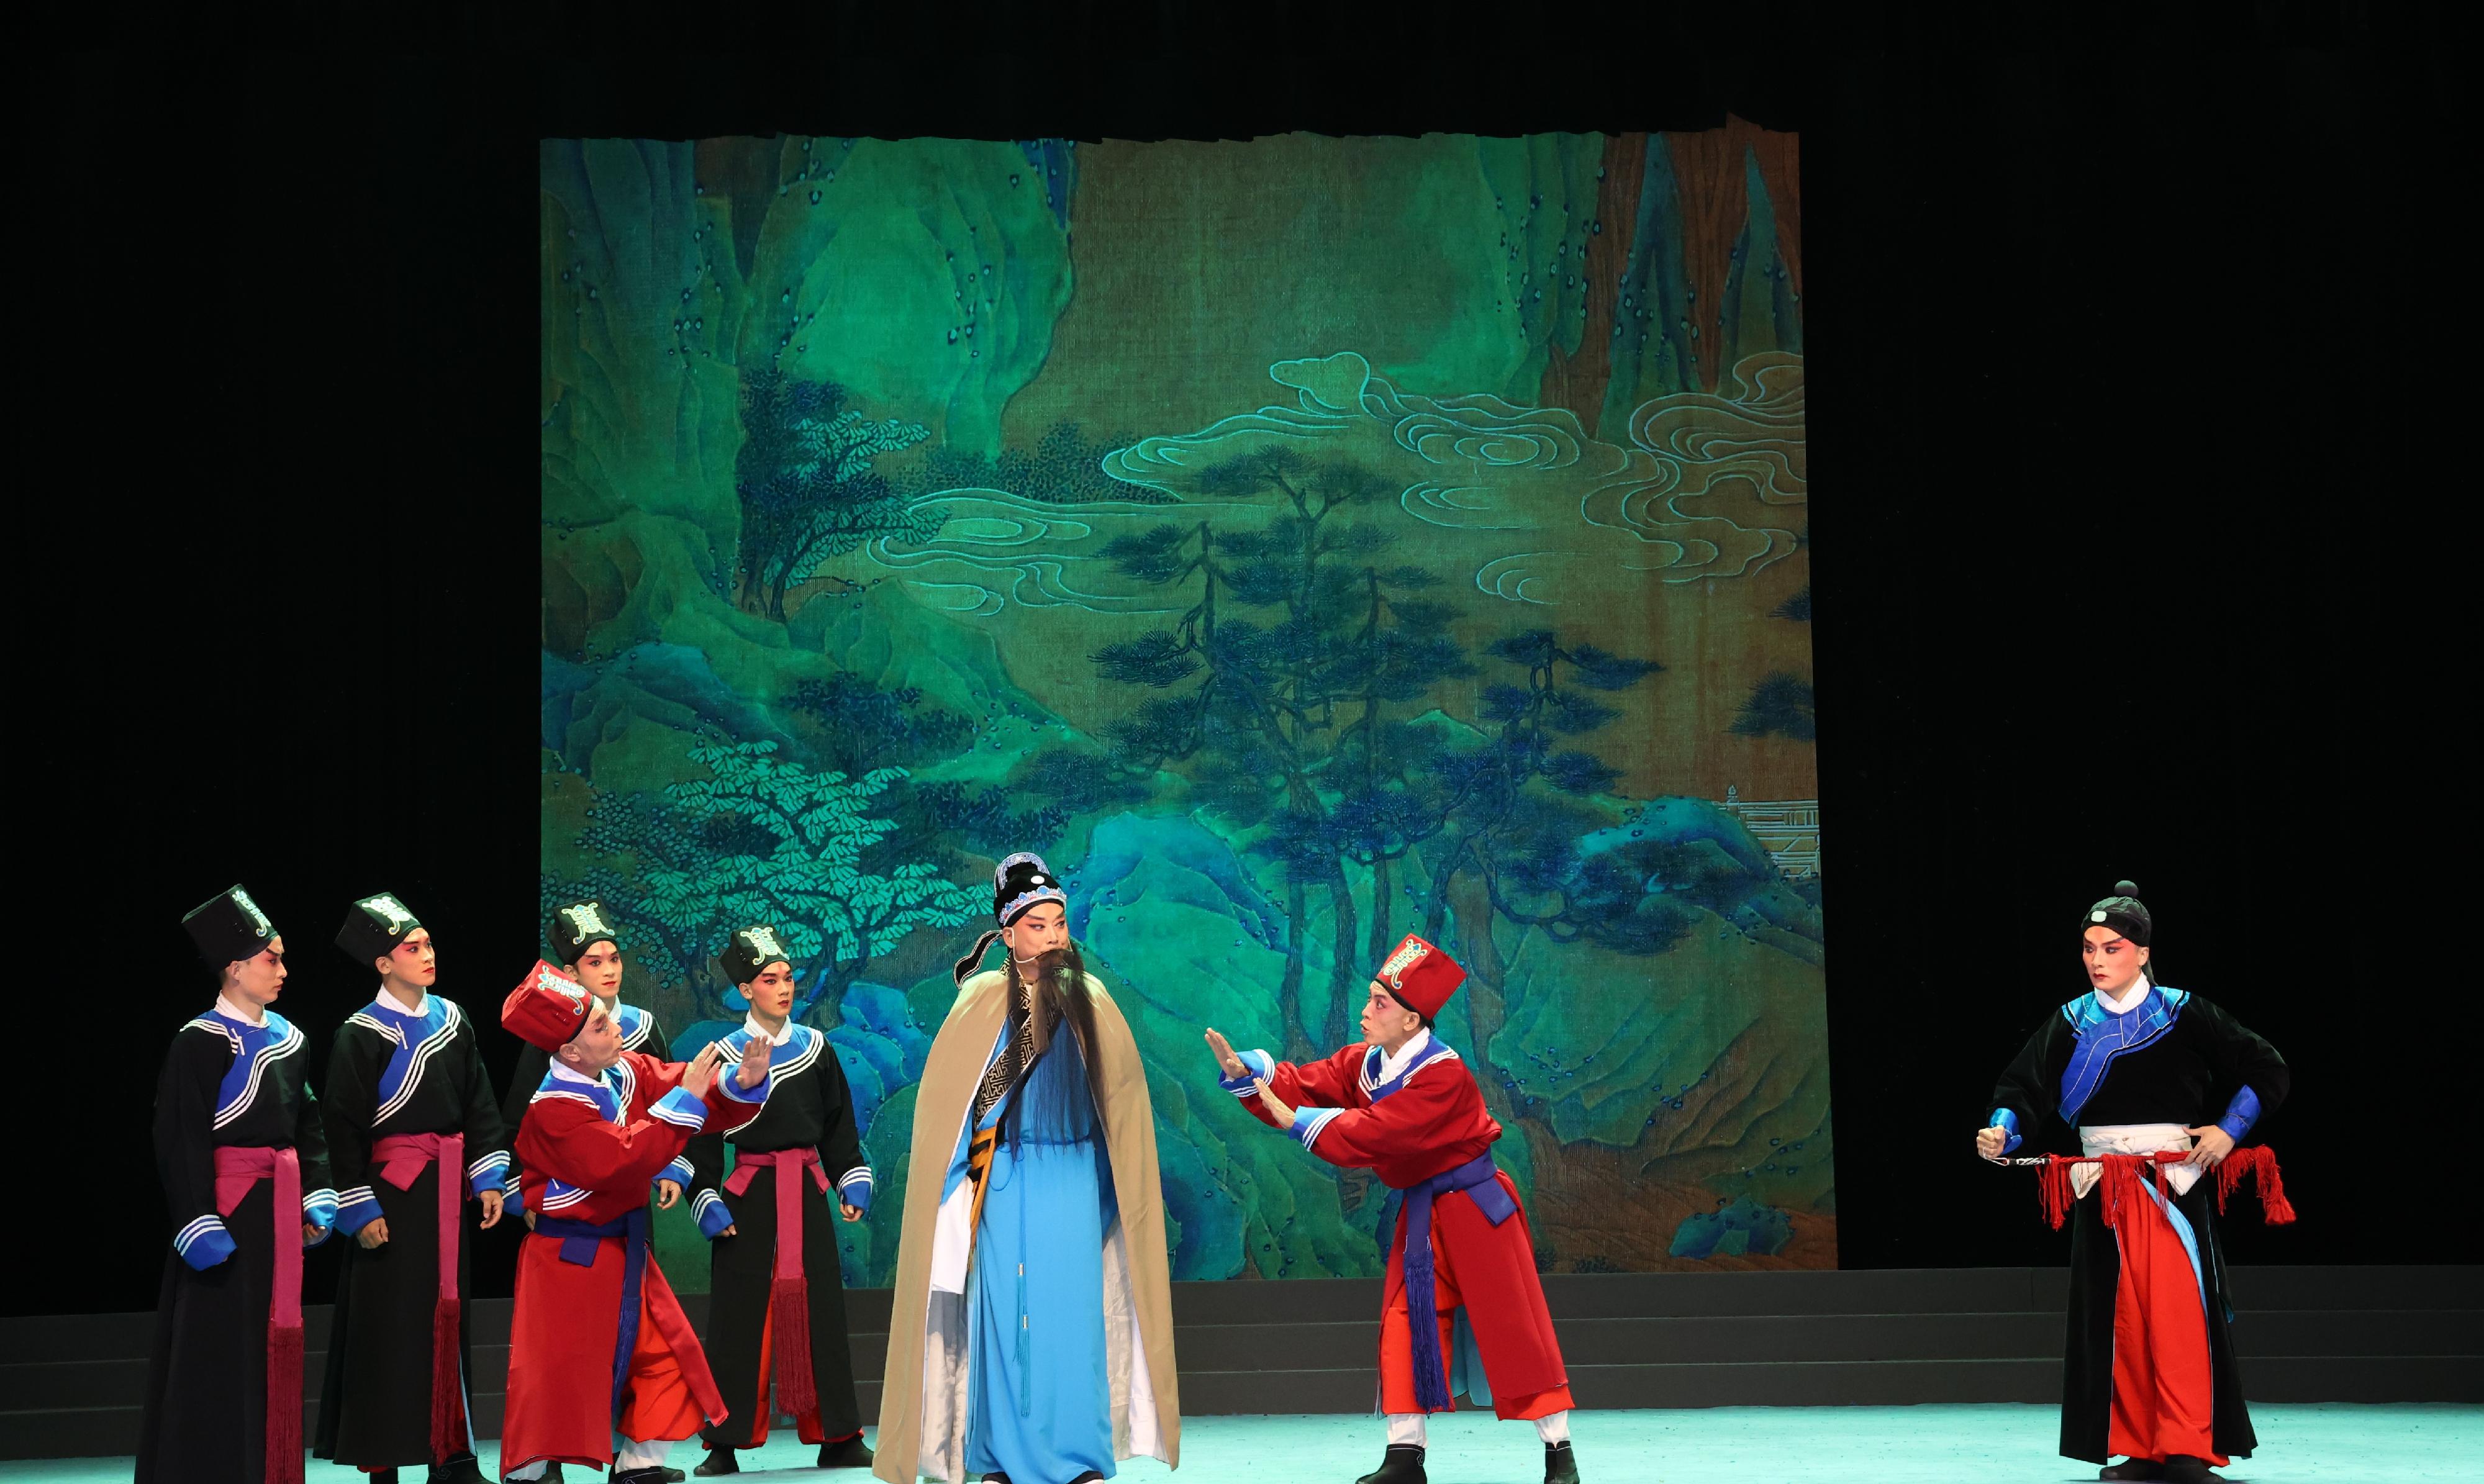 The inaugural Chinese Culture Festival will present two North Road Bangzi opera plays in June. Photo shows a scene from the North Road Bangzi opera performance "Dotting the Eye of a Painted Dragon".
